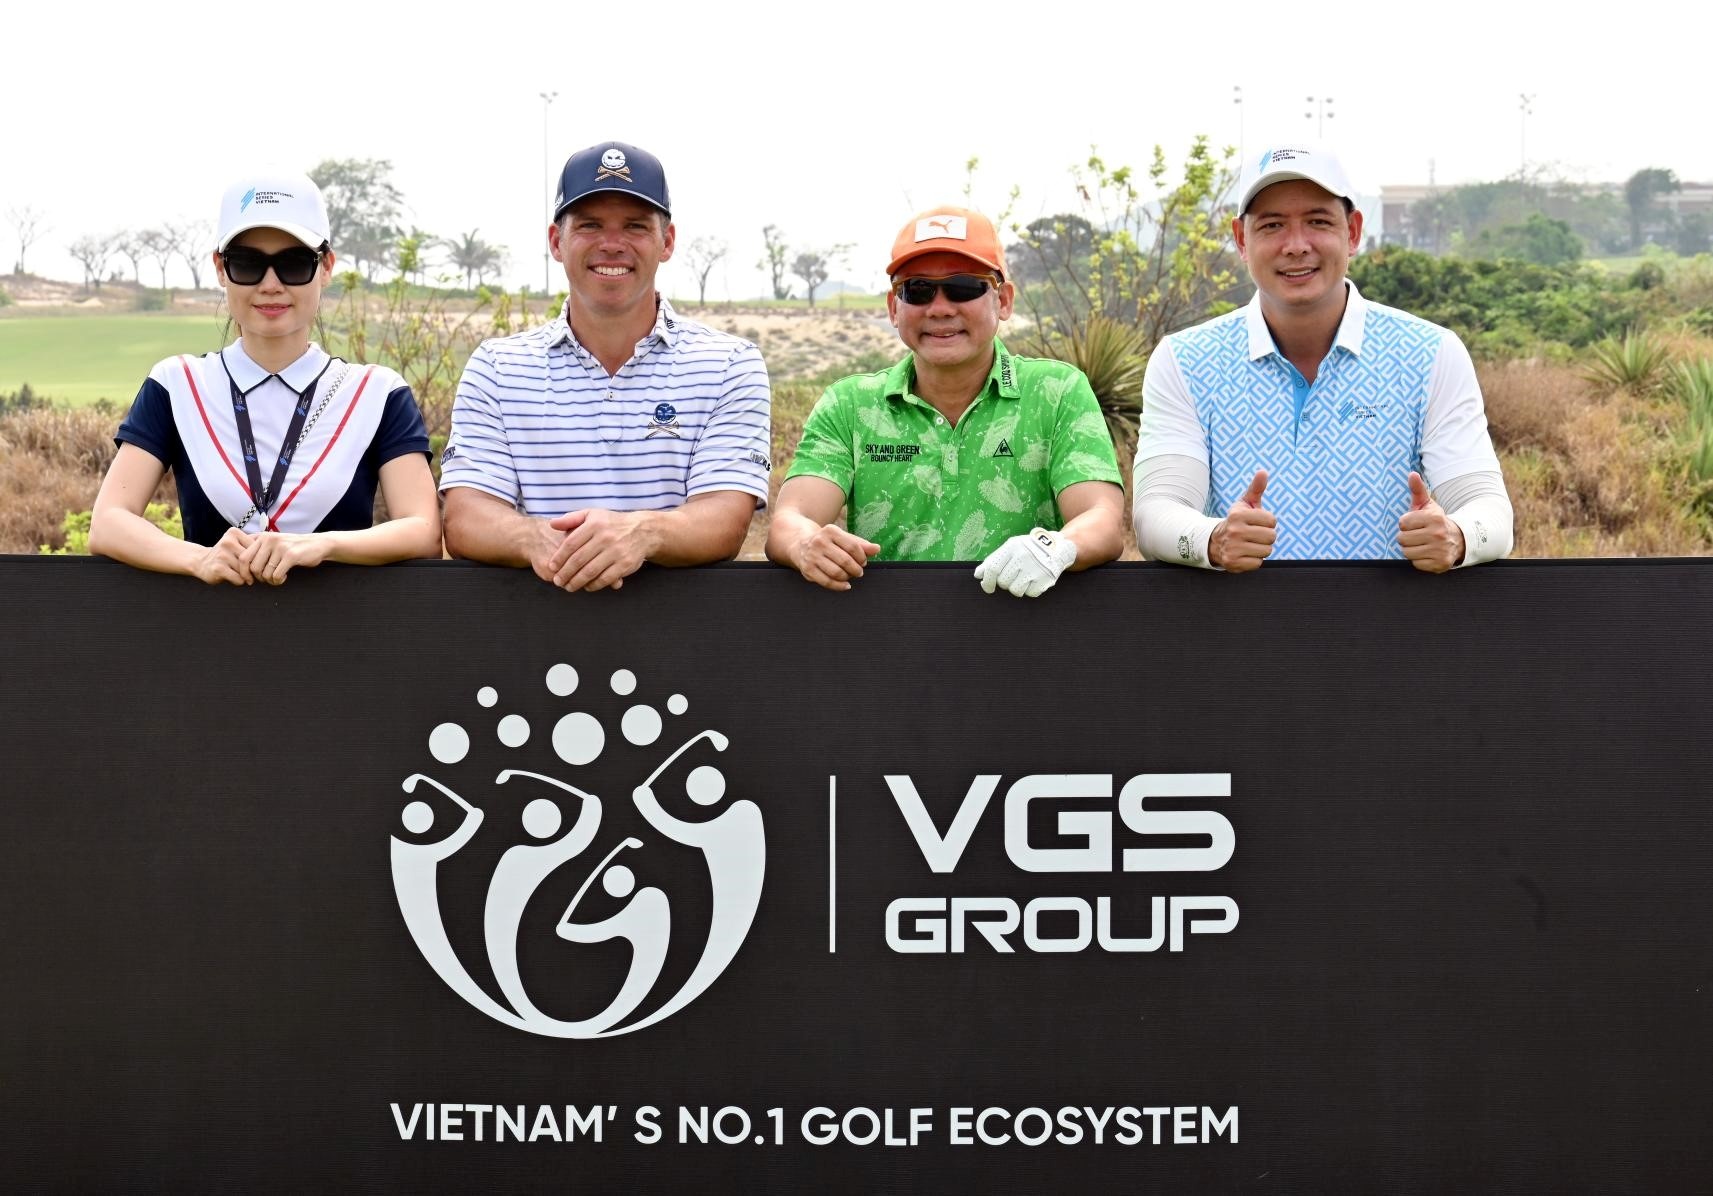 International Series to provide golf tourism boost